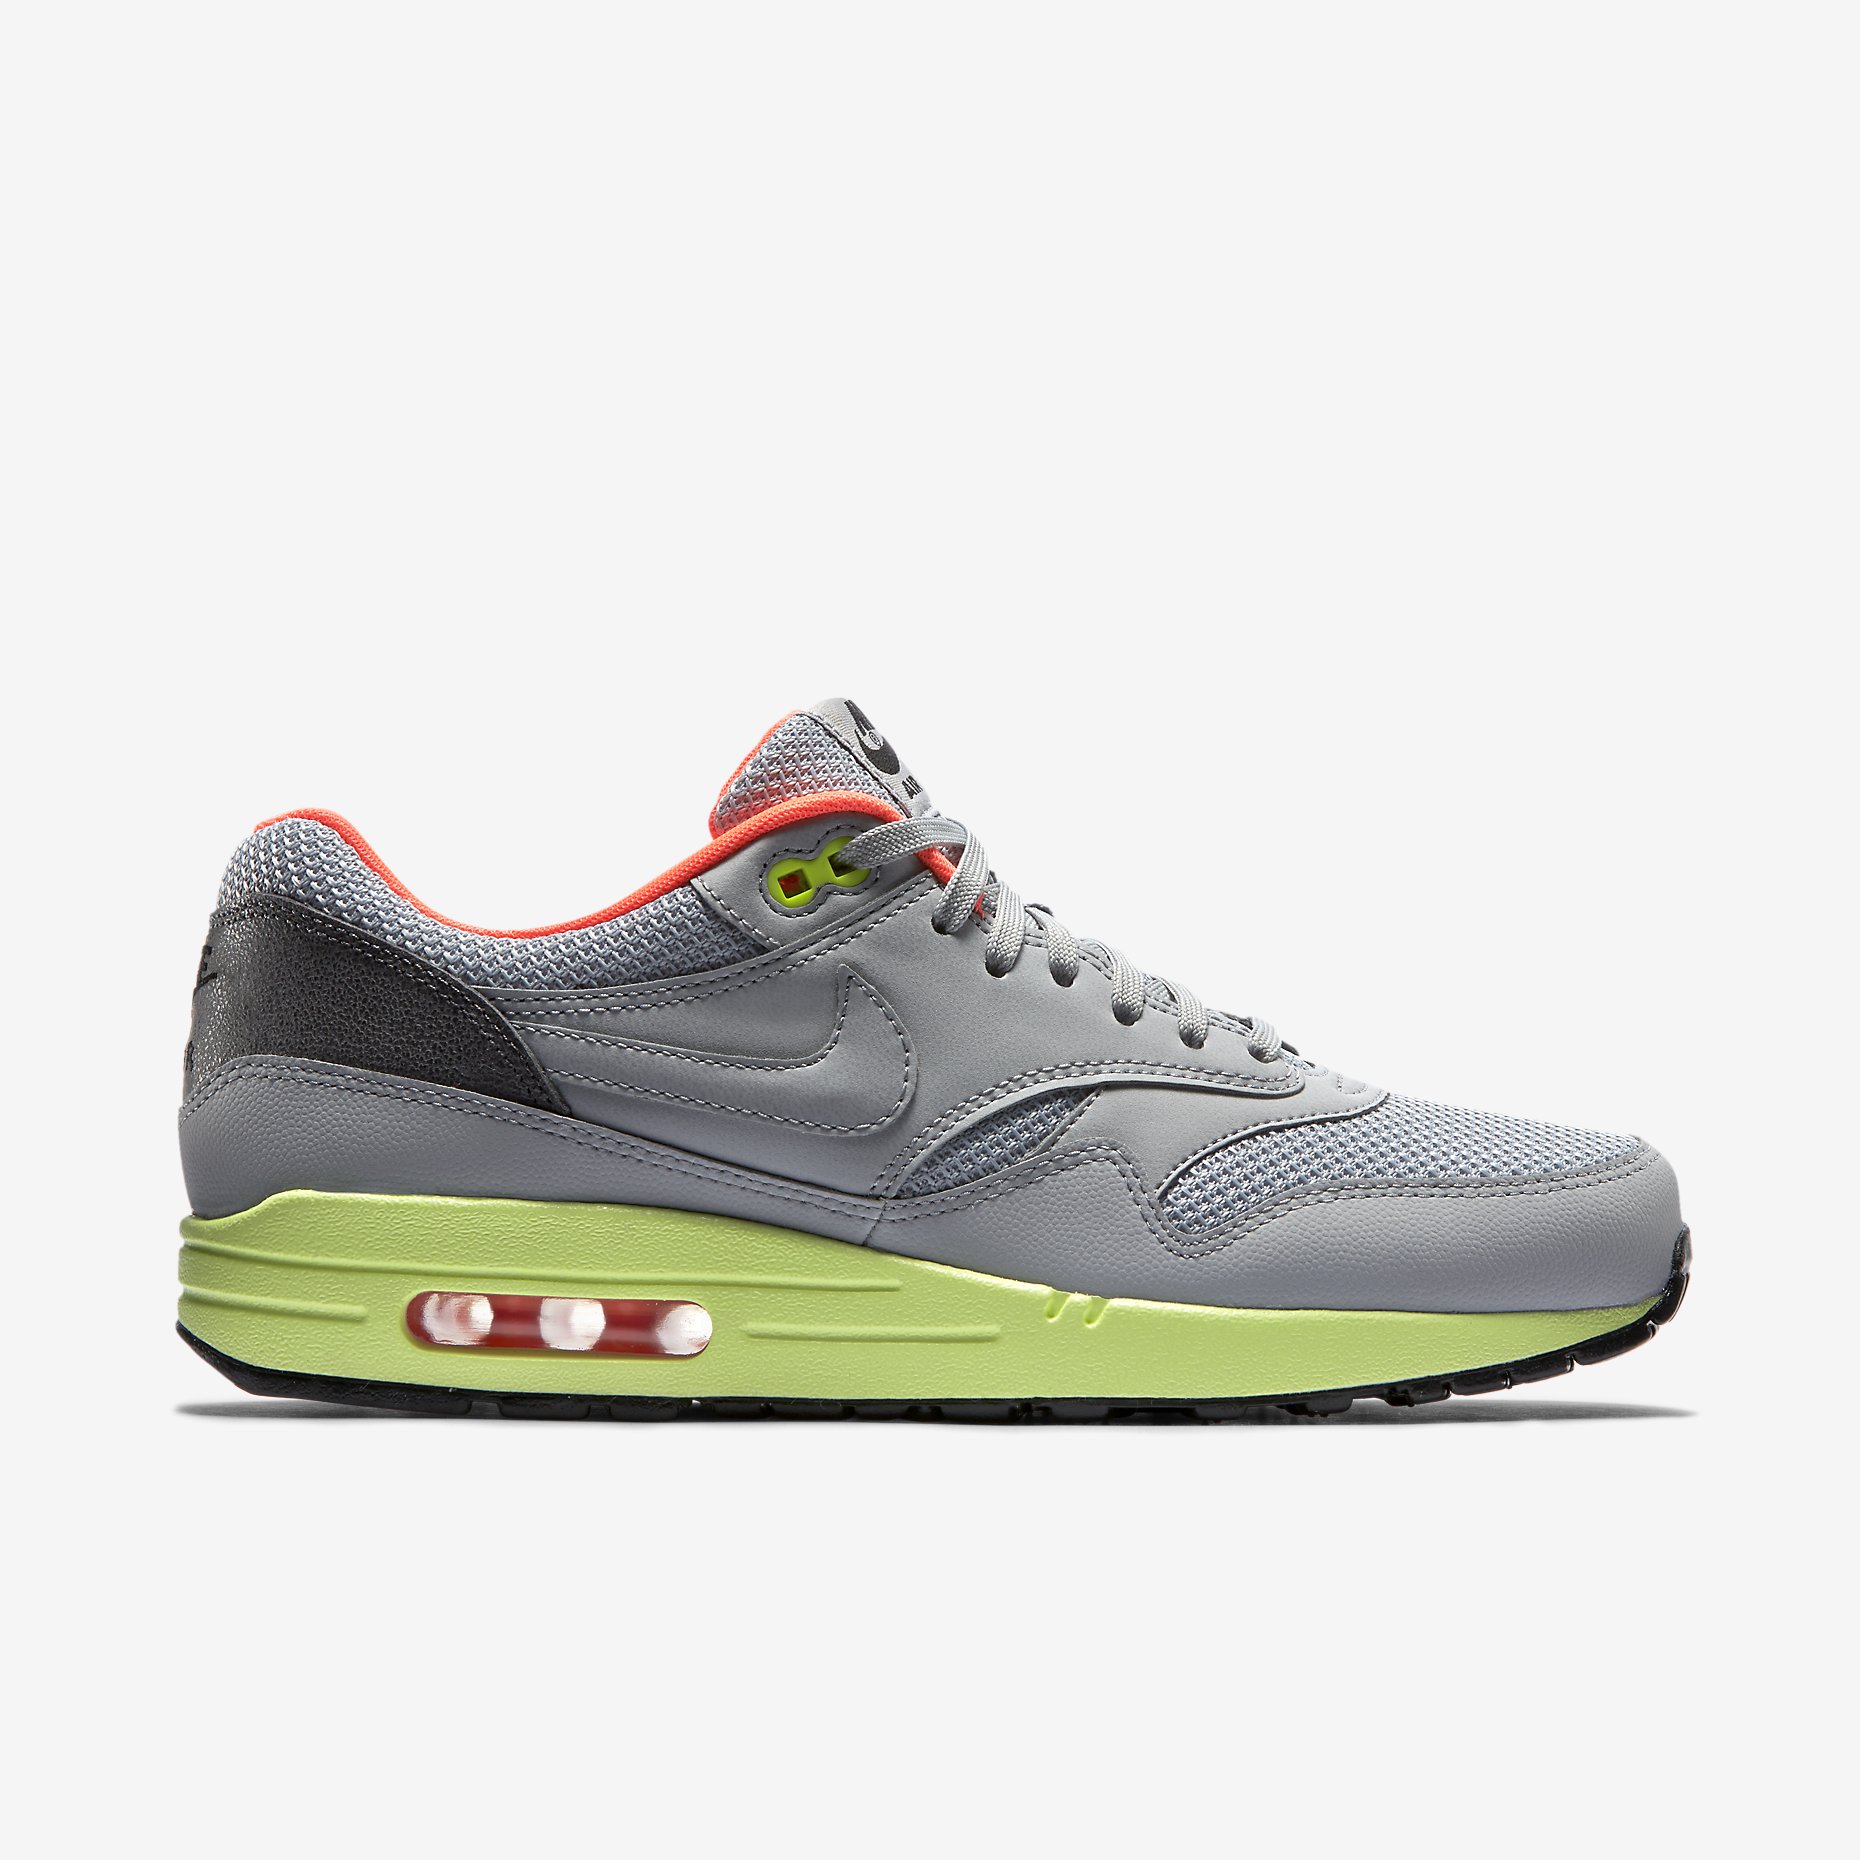 Nike Air Max 1 FB Yeezy Grey Volt | To Buy | 579920-005 The Sole Supplier